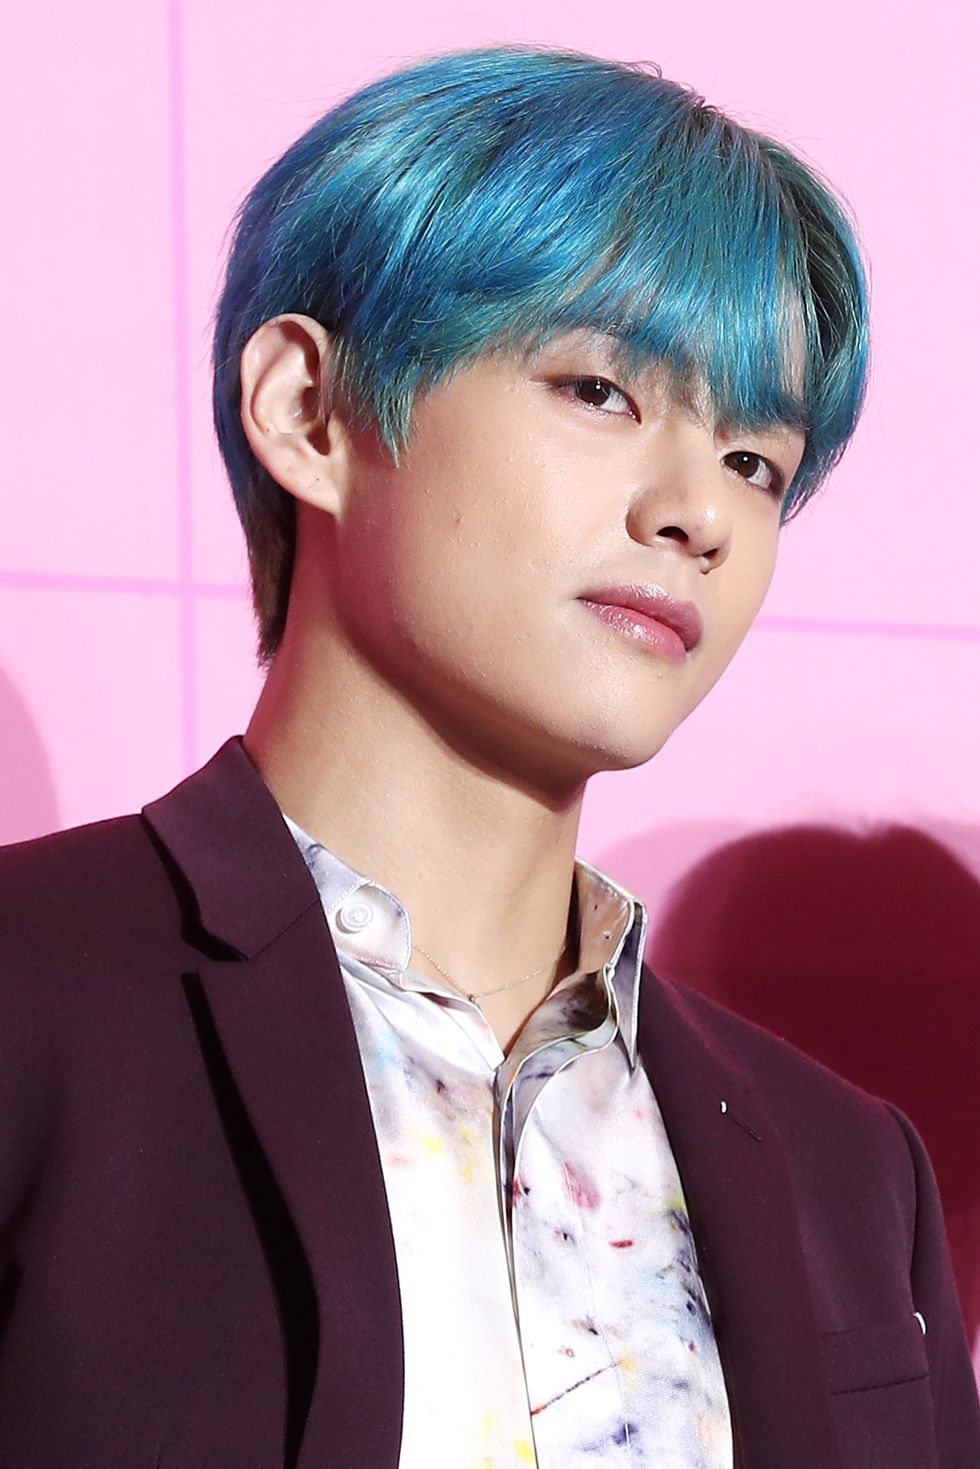 seoul, south korea   april 17 bts is posing at a press conference marking the release of its new album map of the soul persona at dongdaemun design plaza in central seoul on april 17, 2019 in seoul, south koreaphoto by jtbc plusimazins via getty images